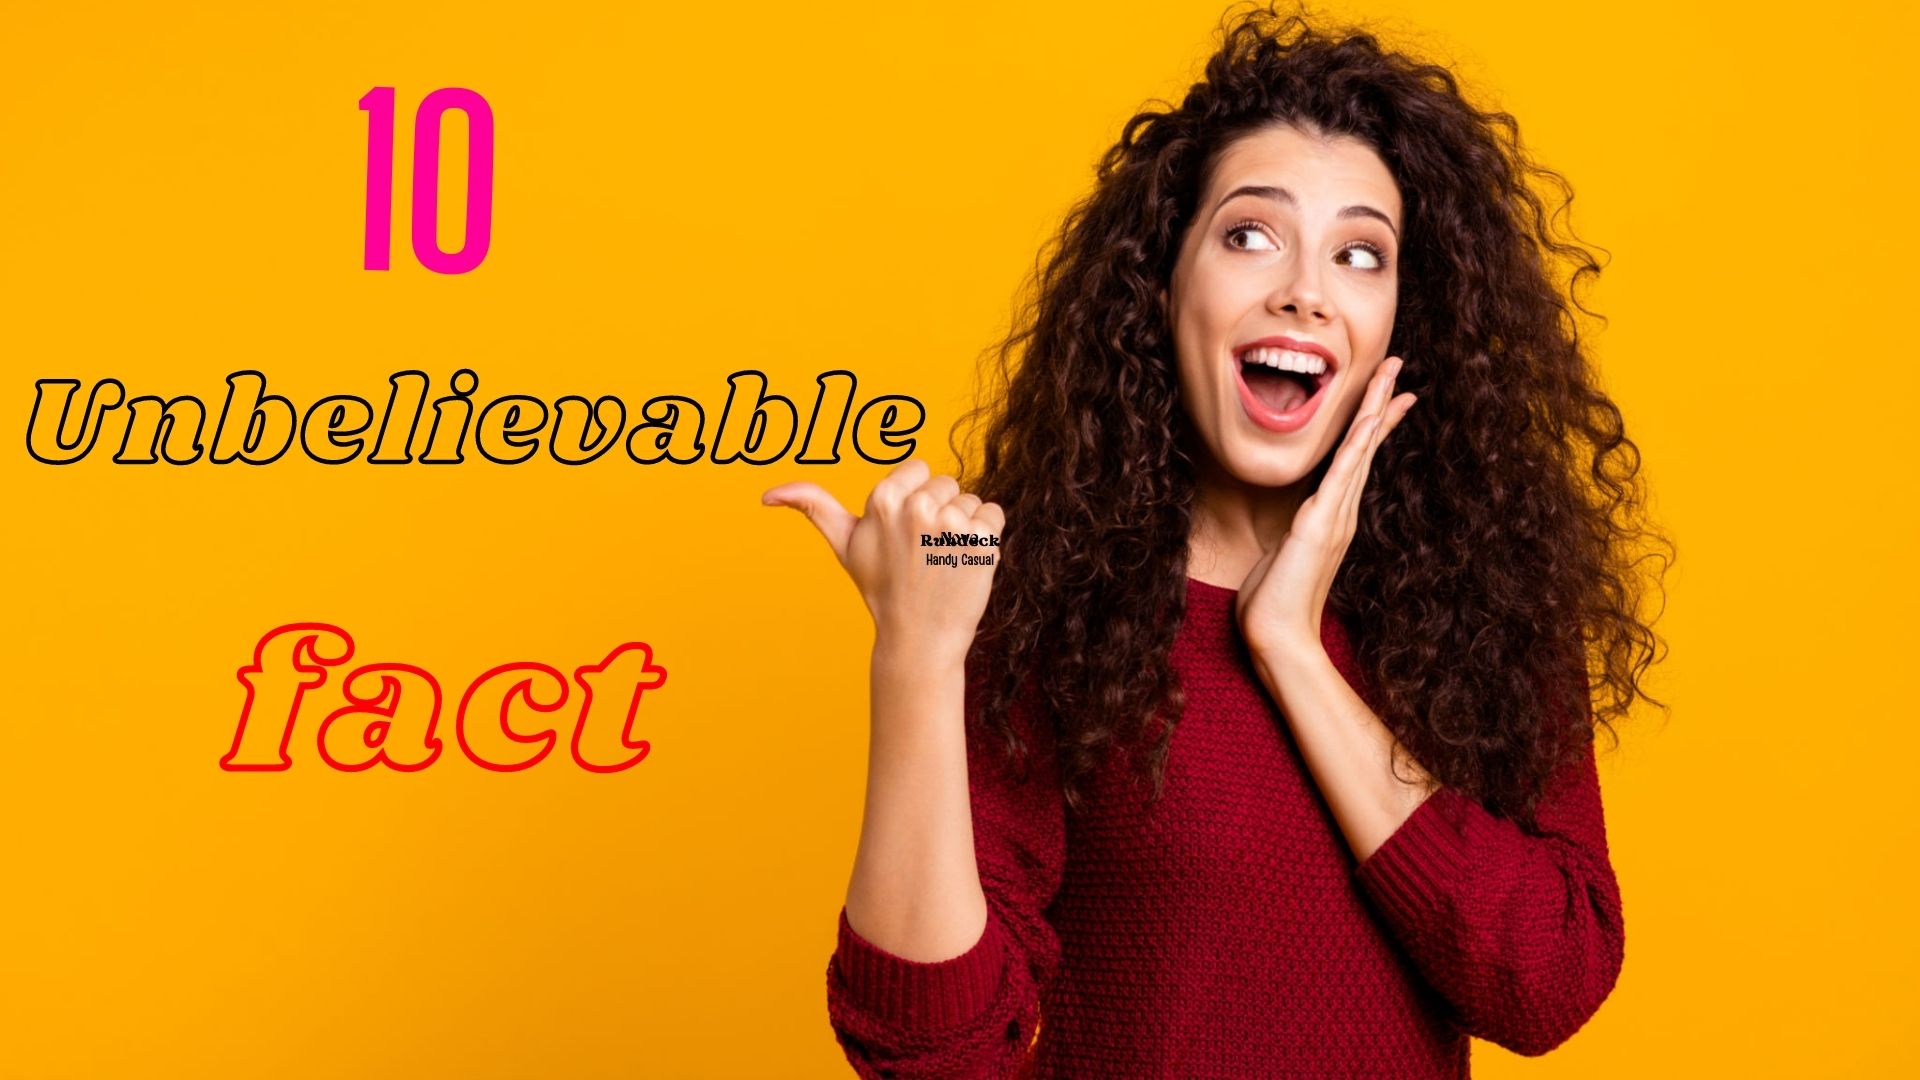 15 unbelievable facts that are true